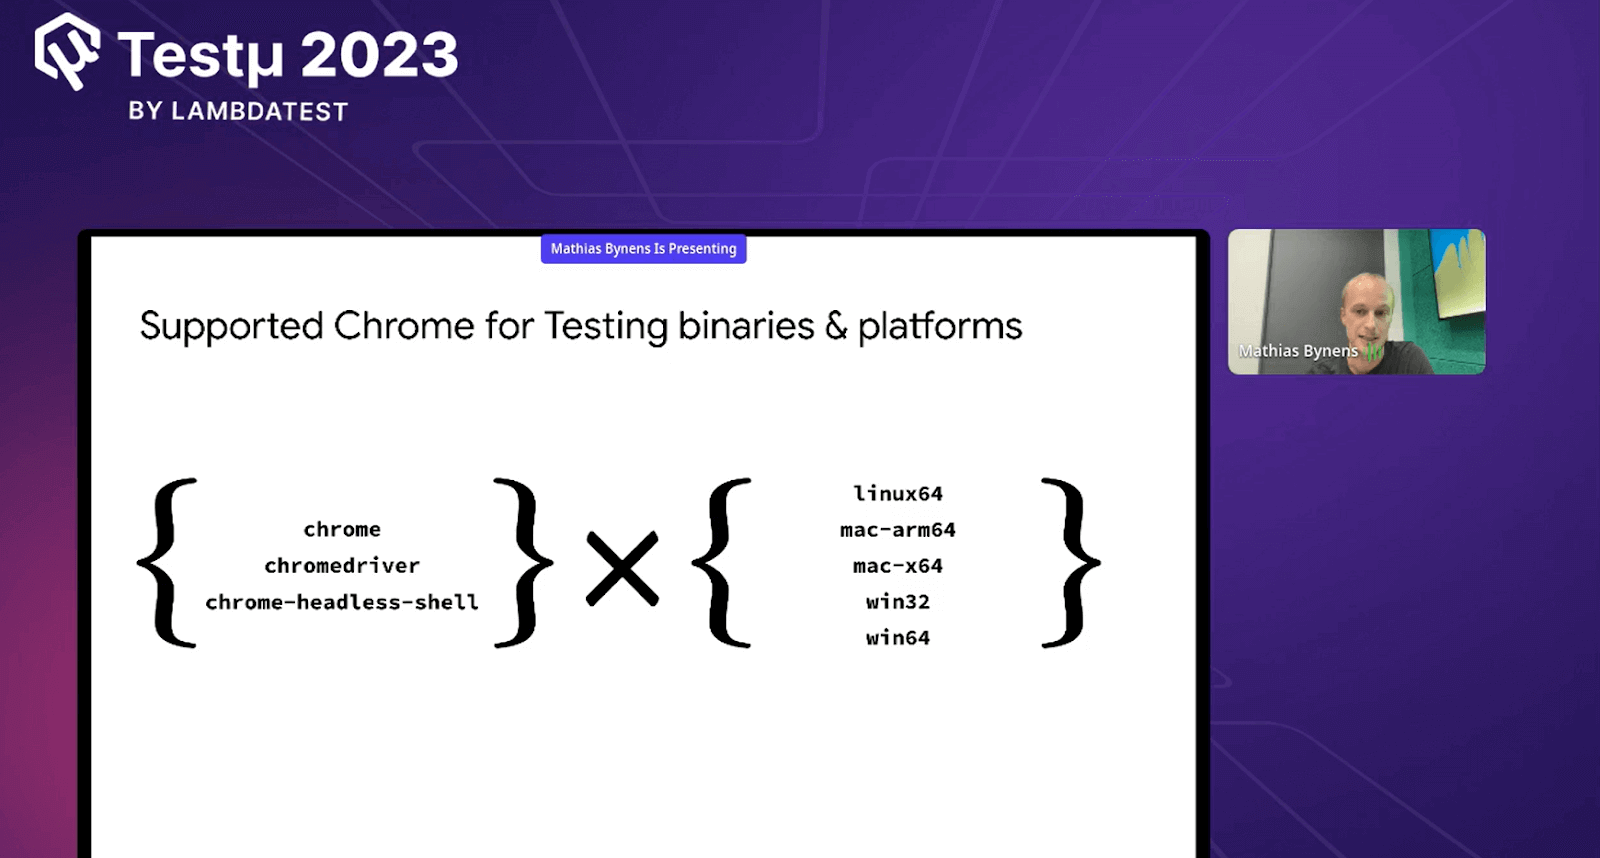 Supported Chrome for Testing binaries & Platforms